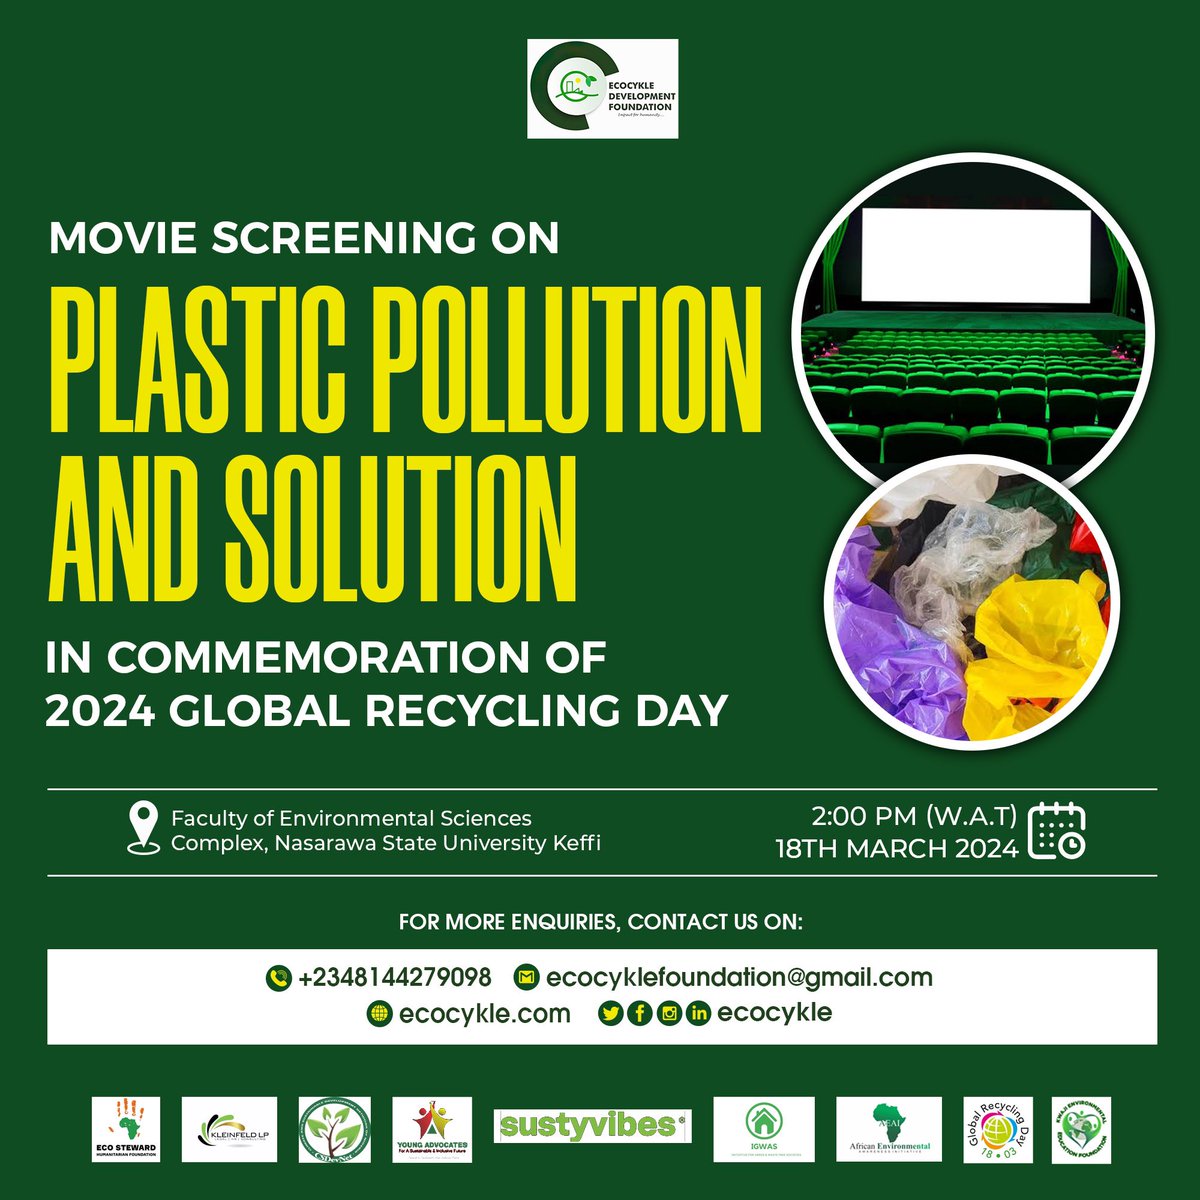 Ever wondered how plastics pollution, micro plactic and their heavy chemicals affects human health, the environment and aquatic species? Join us to commemorate #GRD2024 with a movie screening about plastic pollution and solutions. 🗓 18th March 2024 🕑 2:00pm WAT 📍NSUK, Keffi